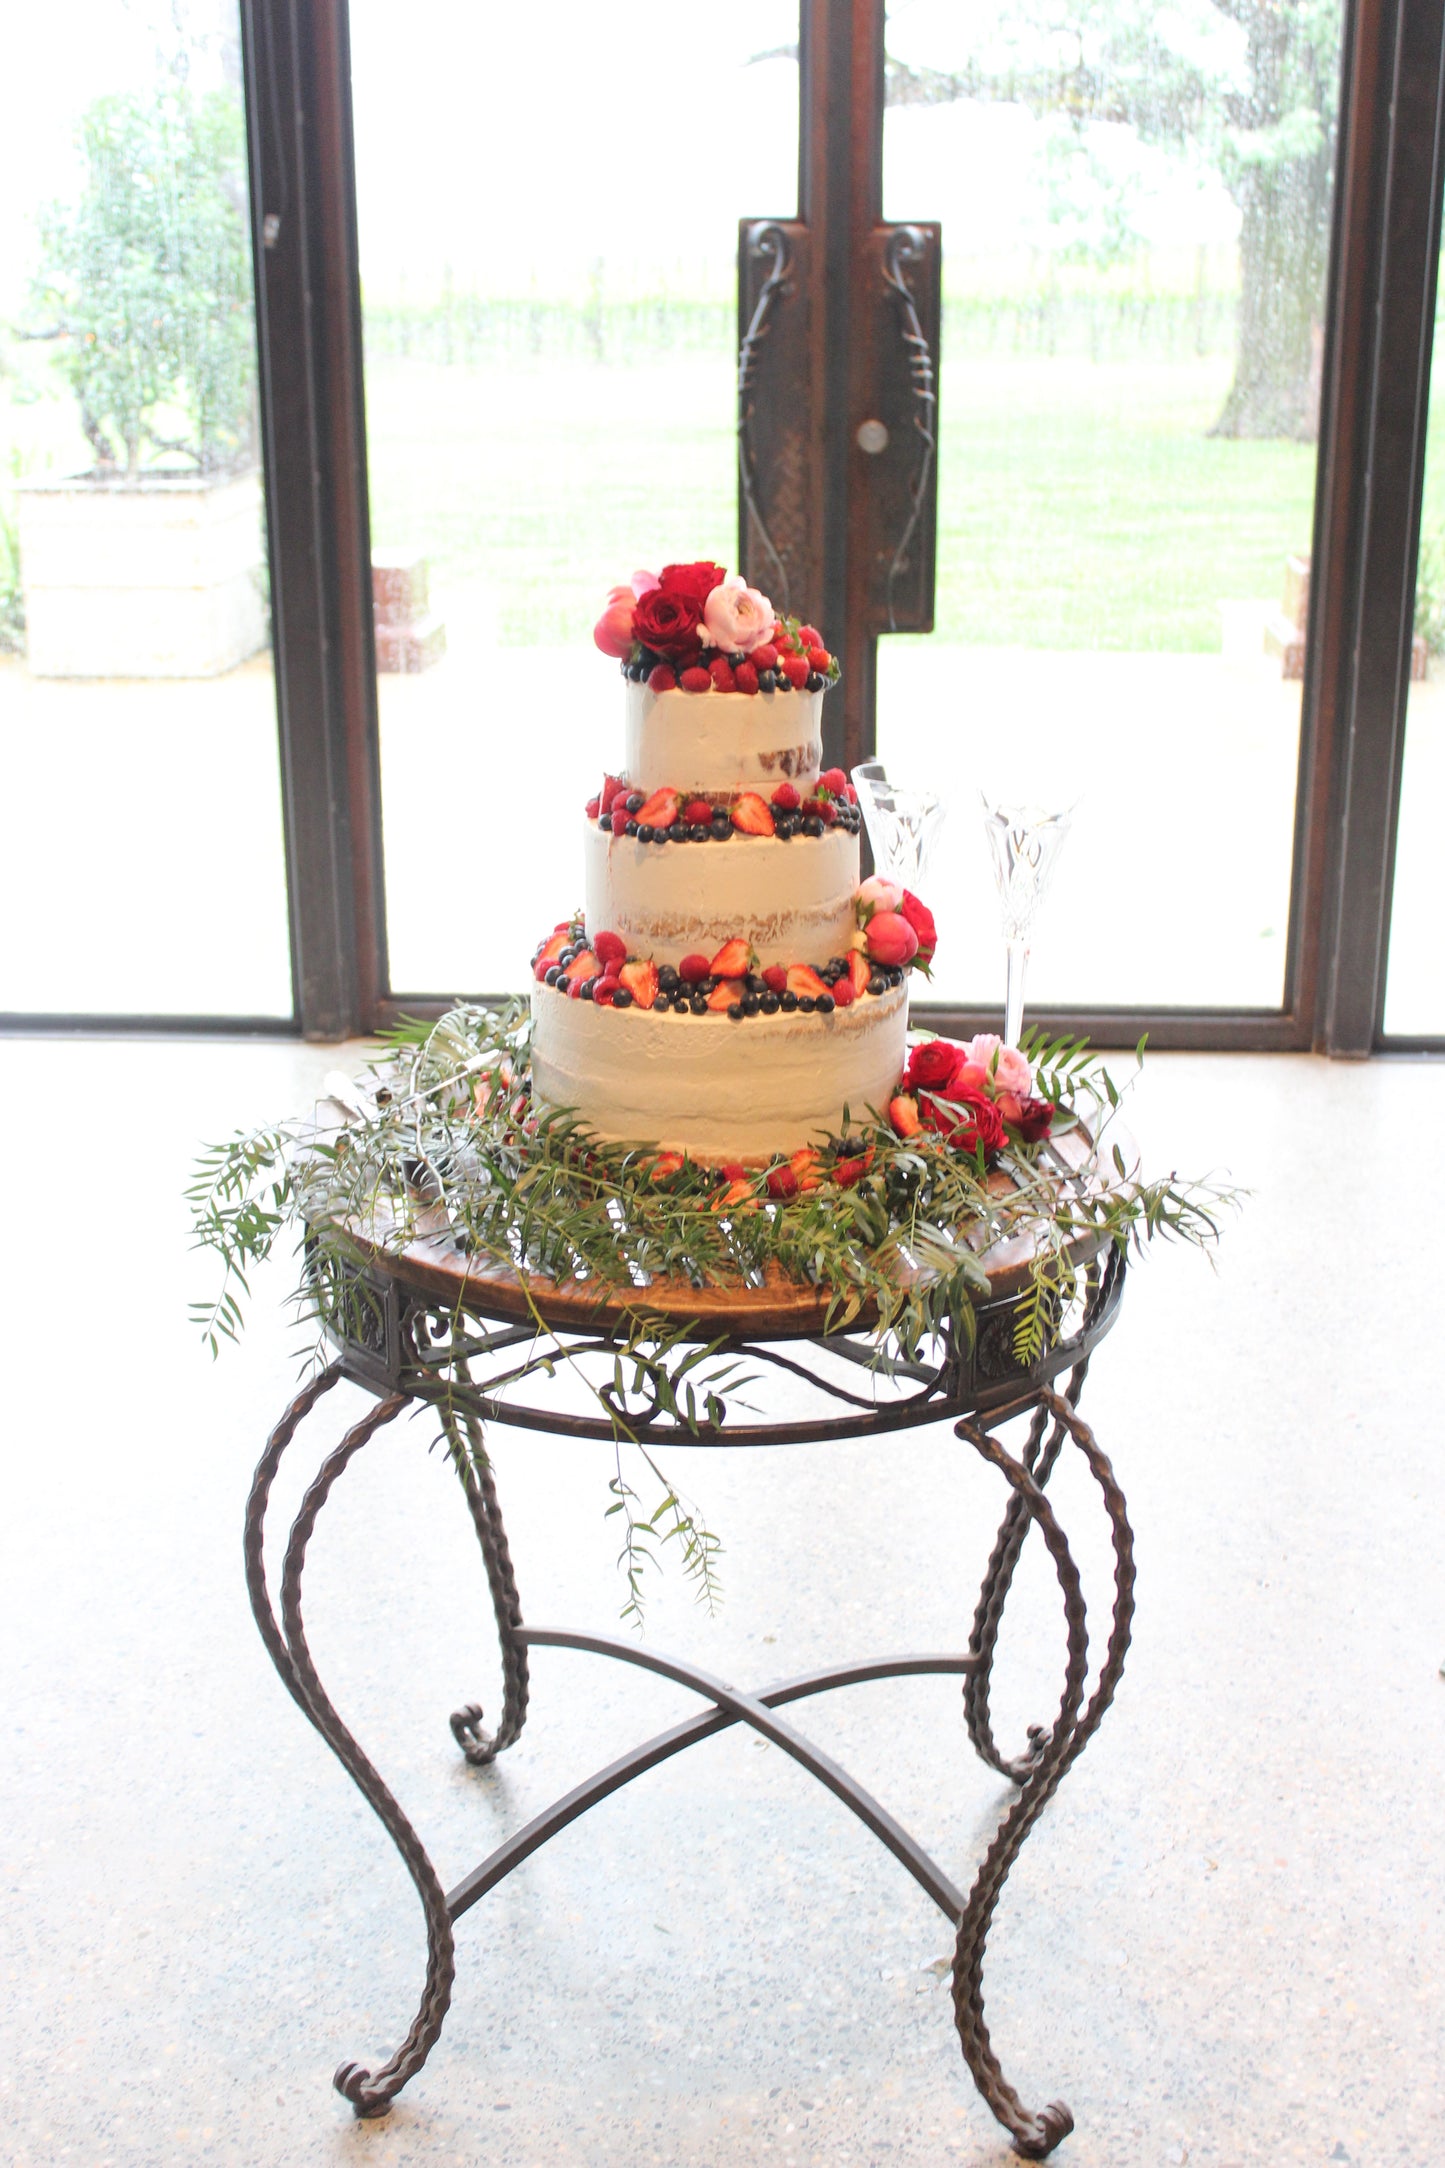 3 Tier Semi Naked with Berries & Flowers